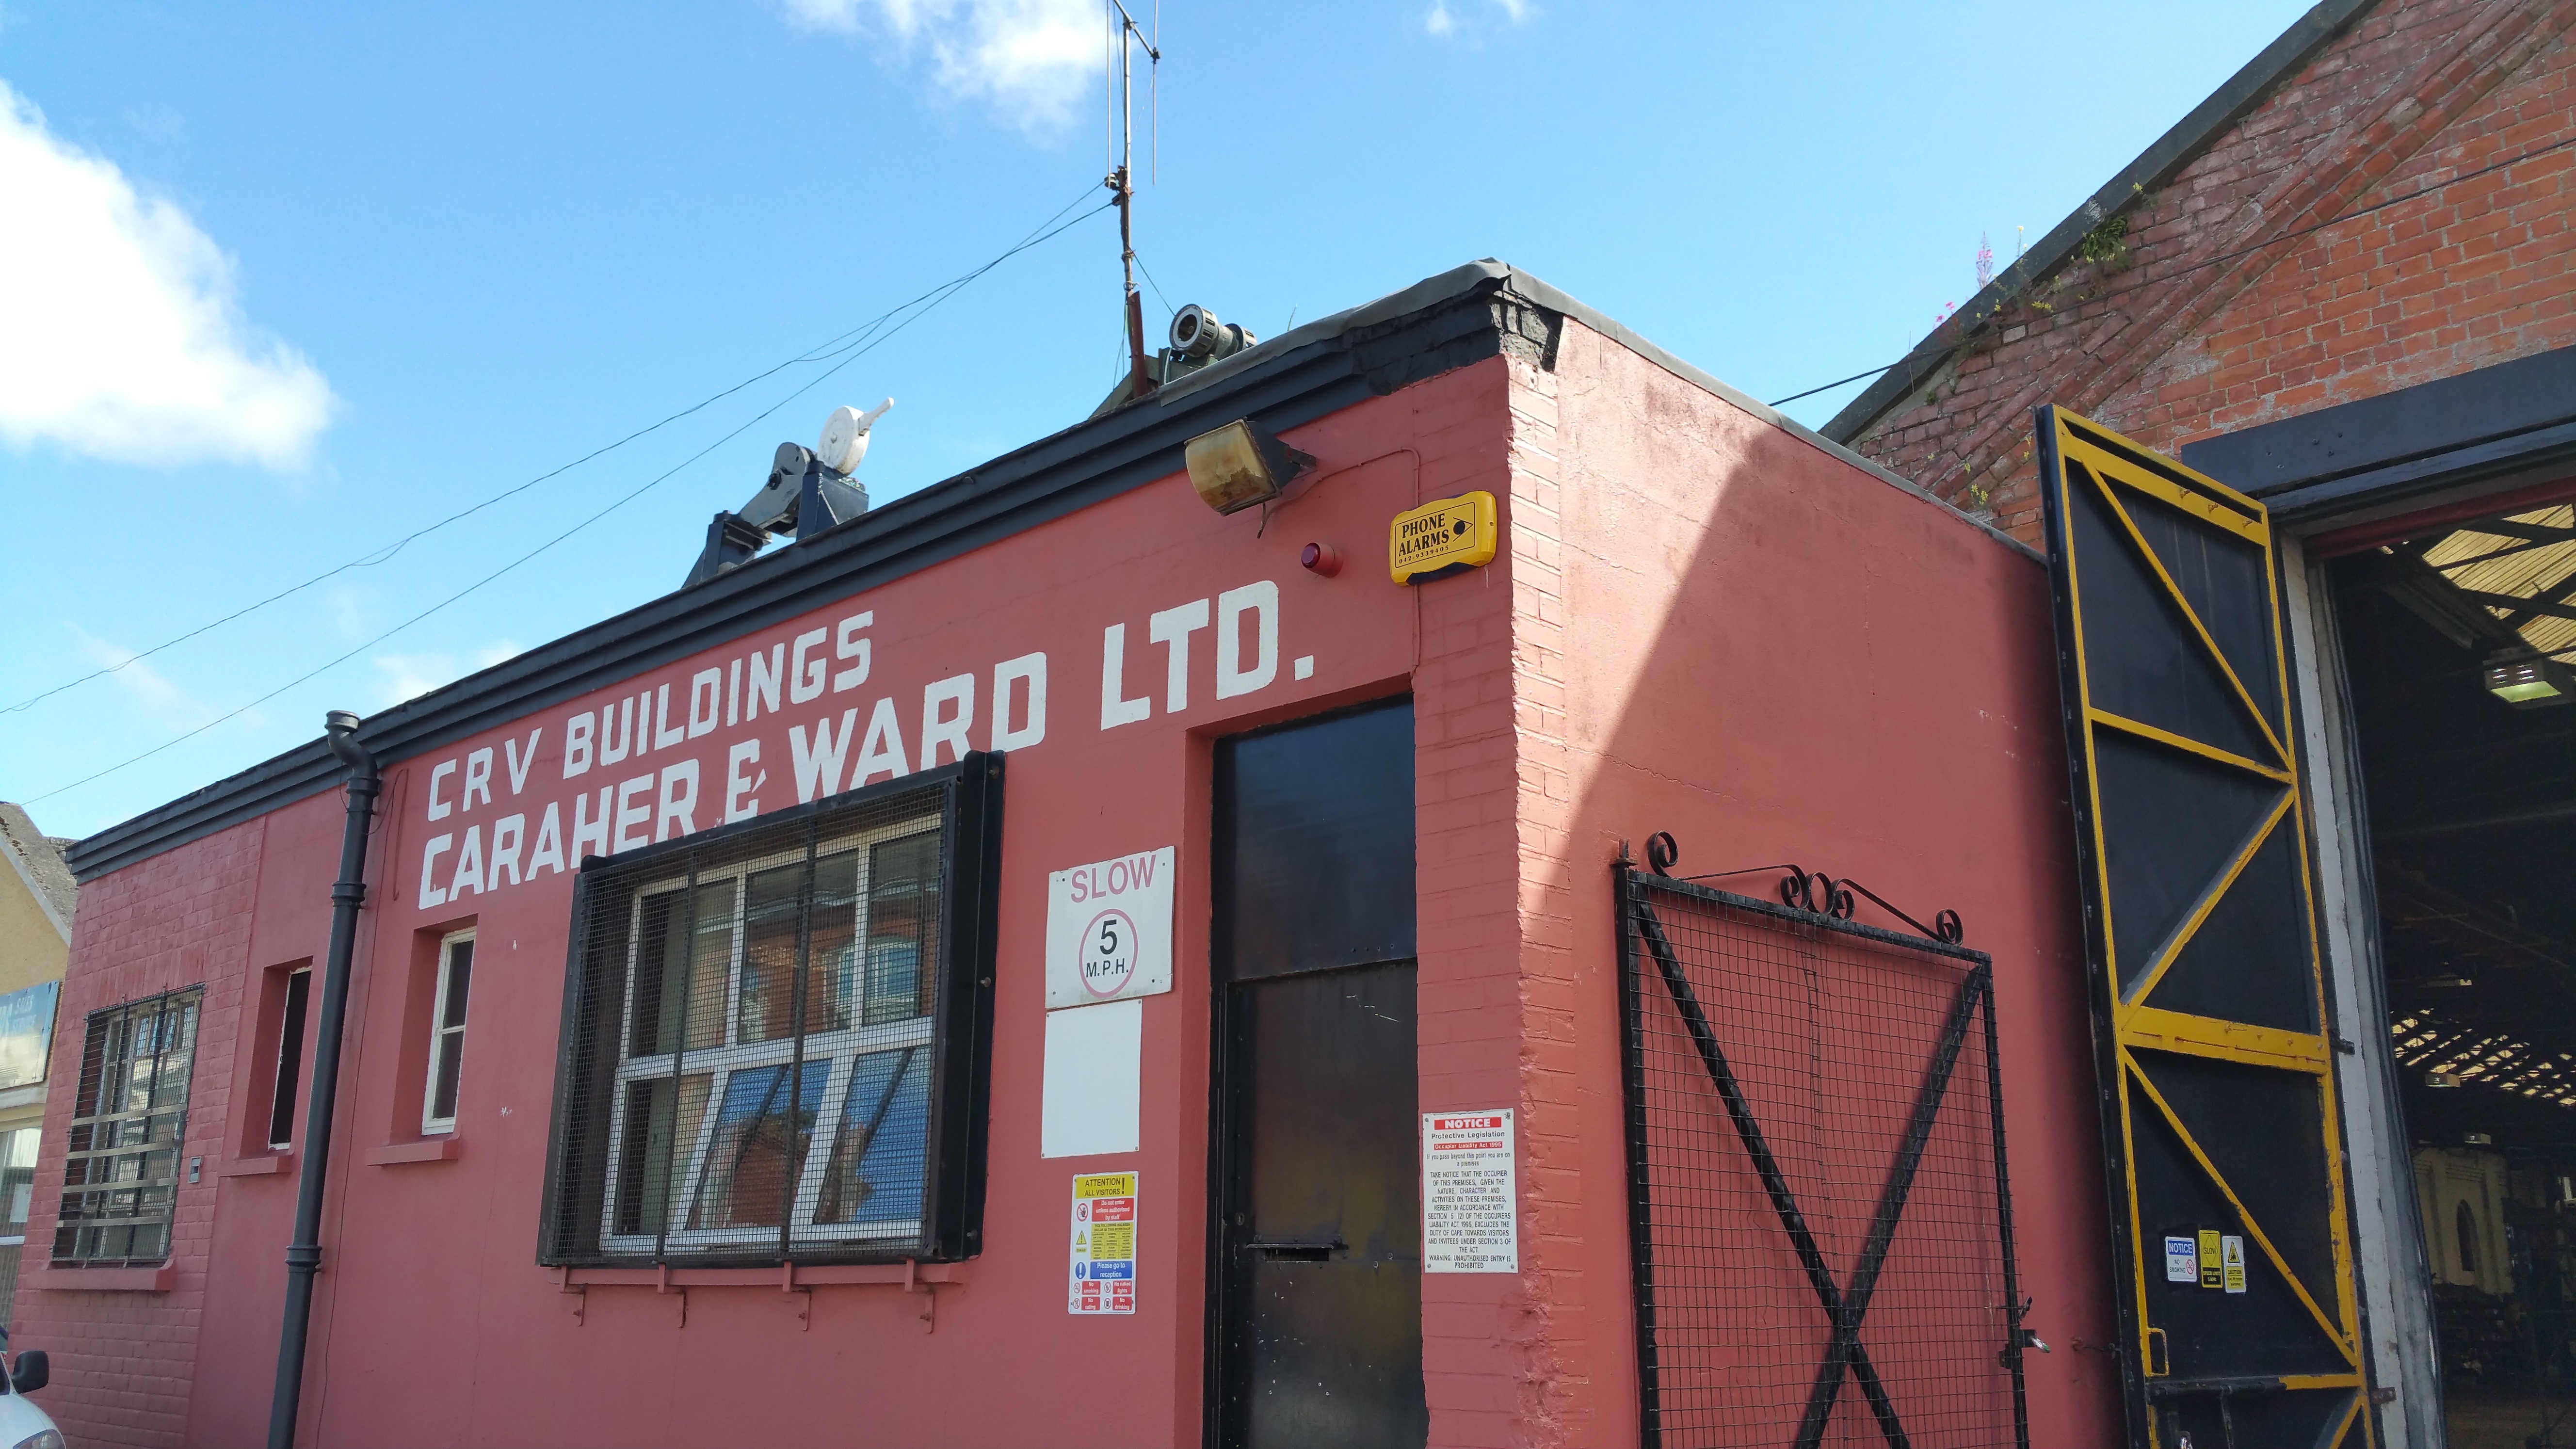 Caraher & Ward Ltd. is a vehicle repairs company, founded in 1986. The business is located in the premises formerly used by C.R.V. Ltd. , which was originally used by The Great Northern Railway.